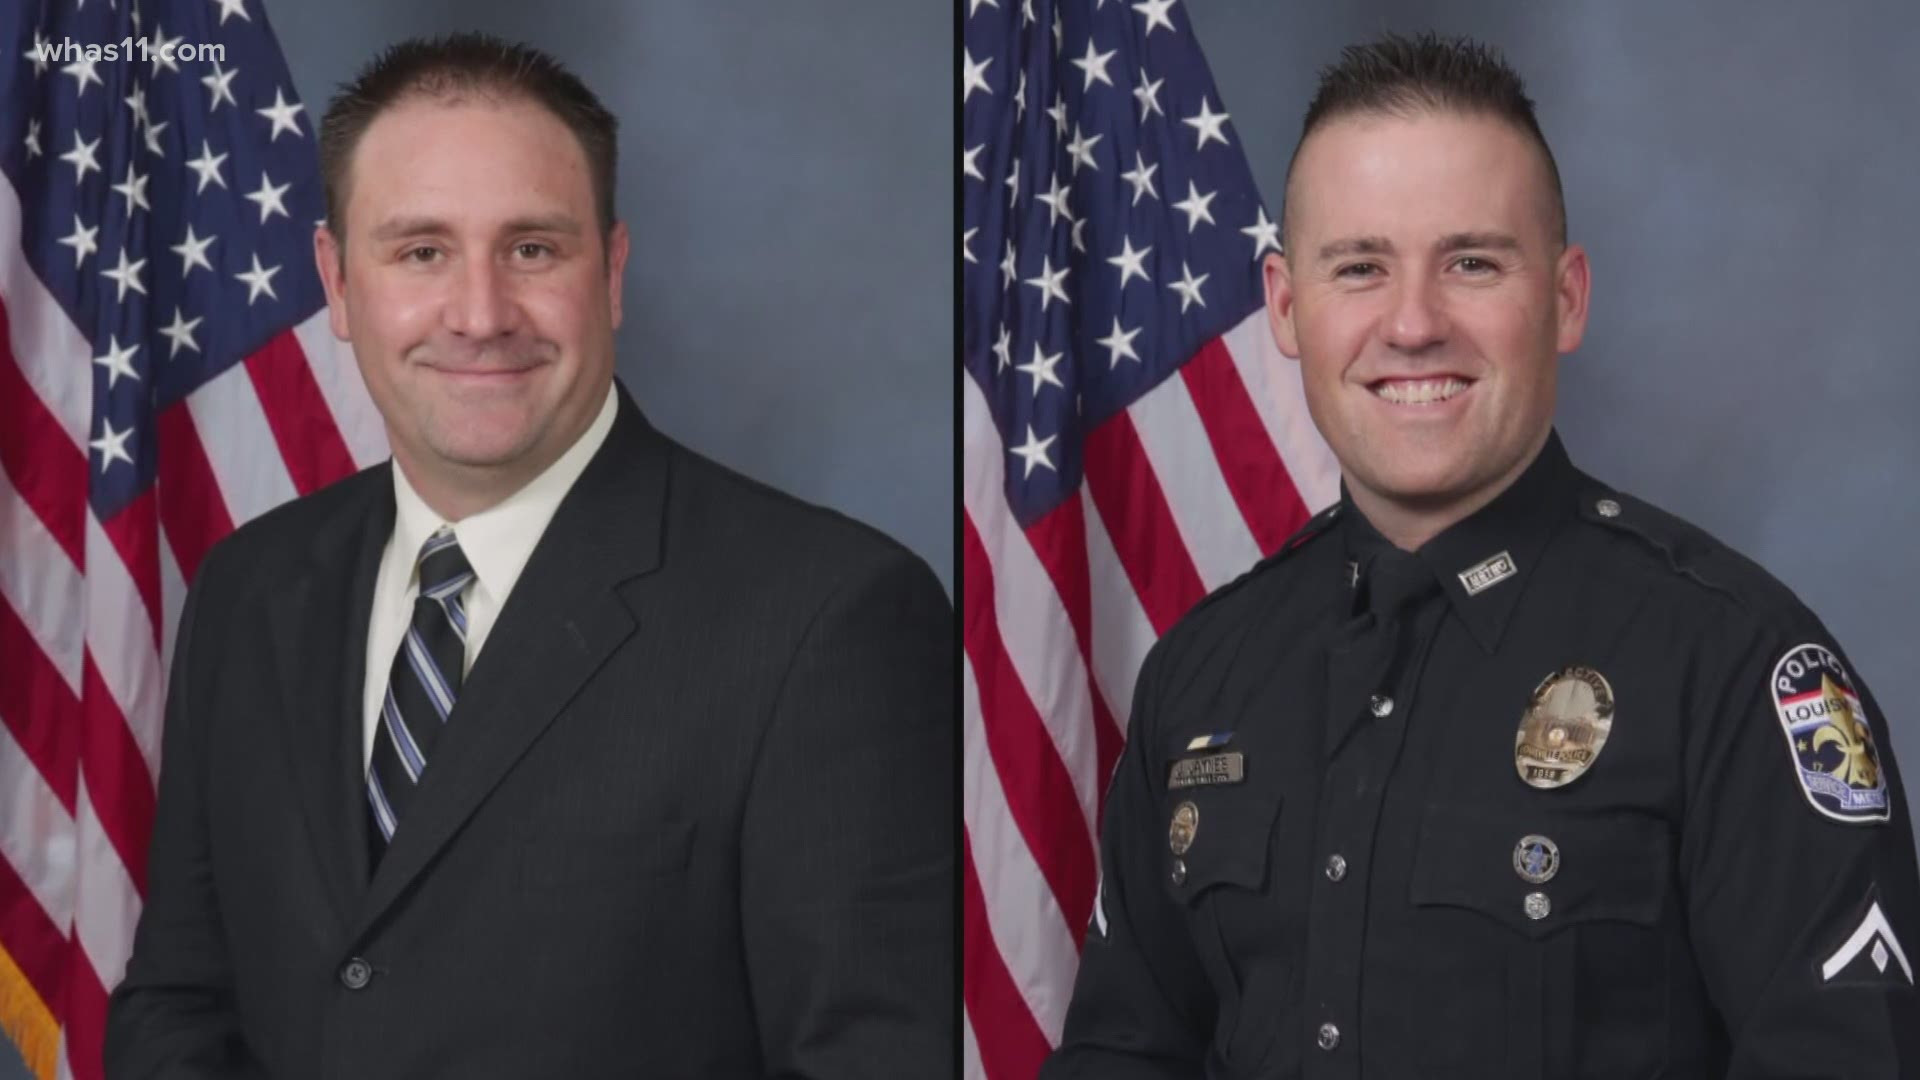 Louisville Metro Police Detectives Joshua Jaynes and Myles Cosgrove have been terminated, according to letters sent from Interim Chief Yvette Gentry.